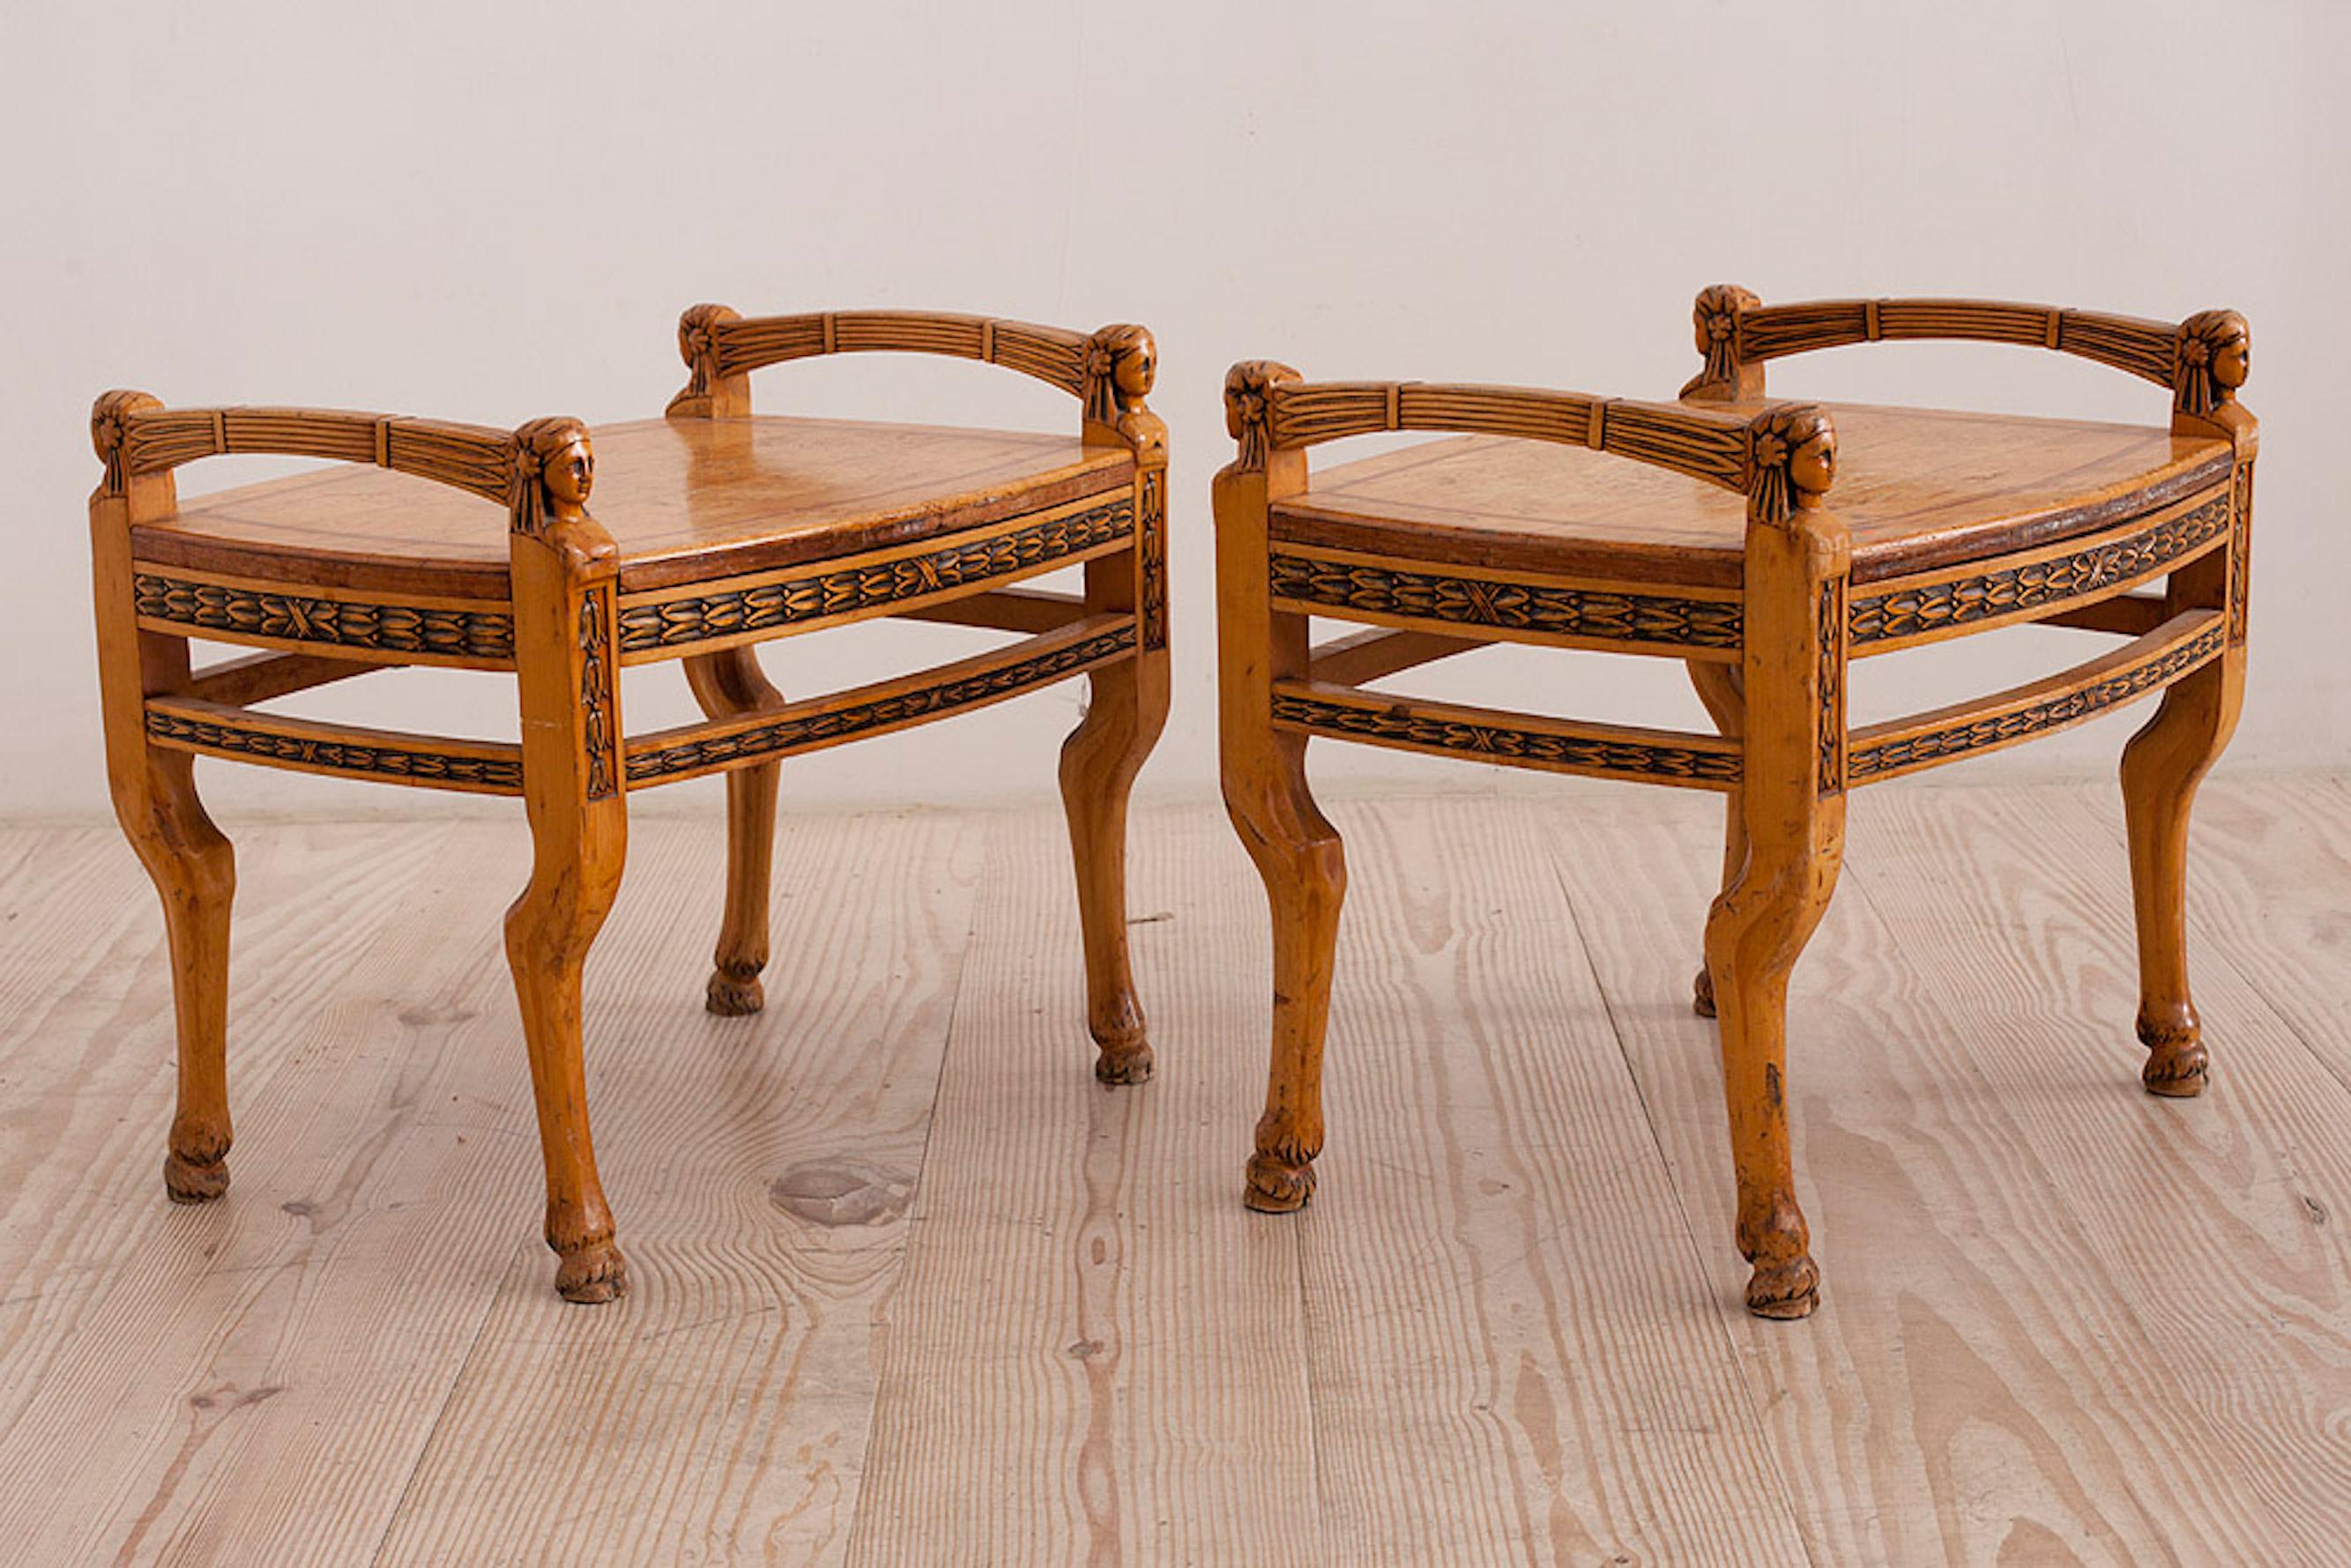 Swedish Karl Johan Taburettes set of three (3) stools with hand carved Egyptian heads, hoof feet with exceptional details of the hock, fetlock and animals fur and beautiful decorative wheat and bell flower carved details. Branded and dated: LÖFMARK